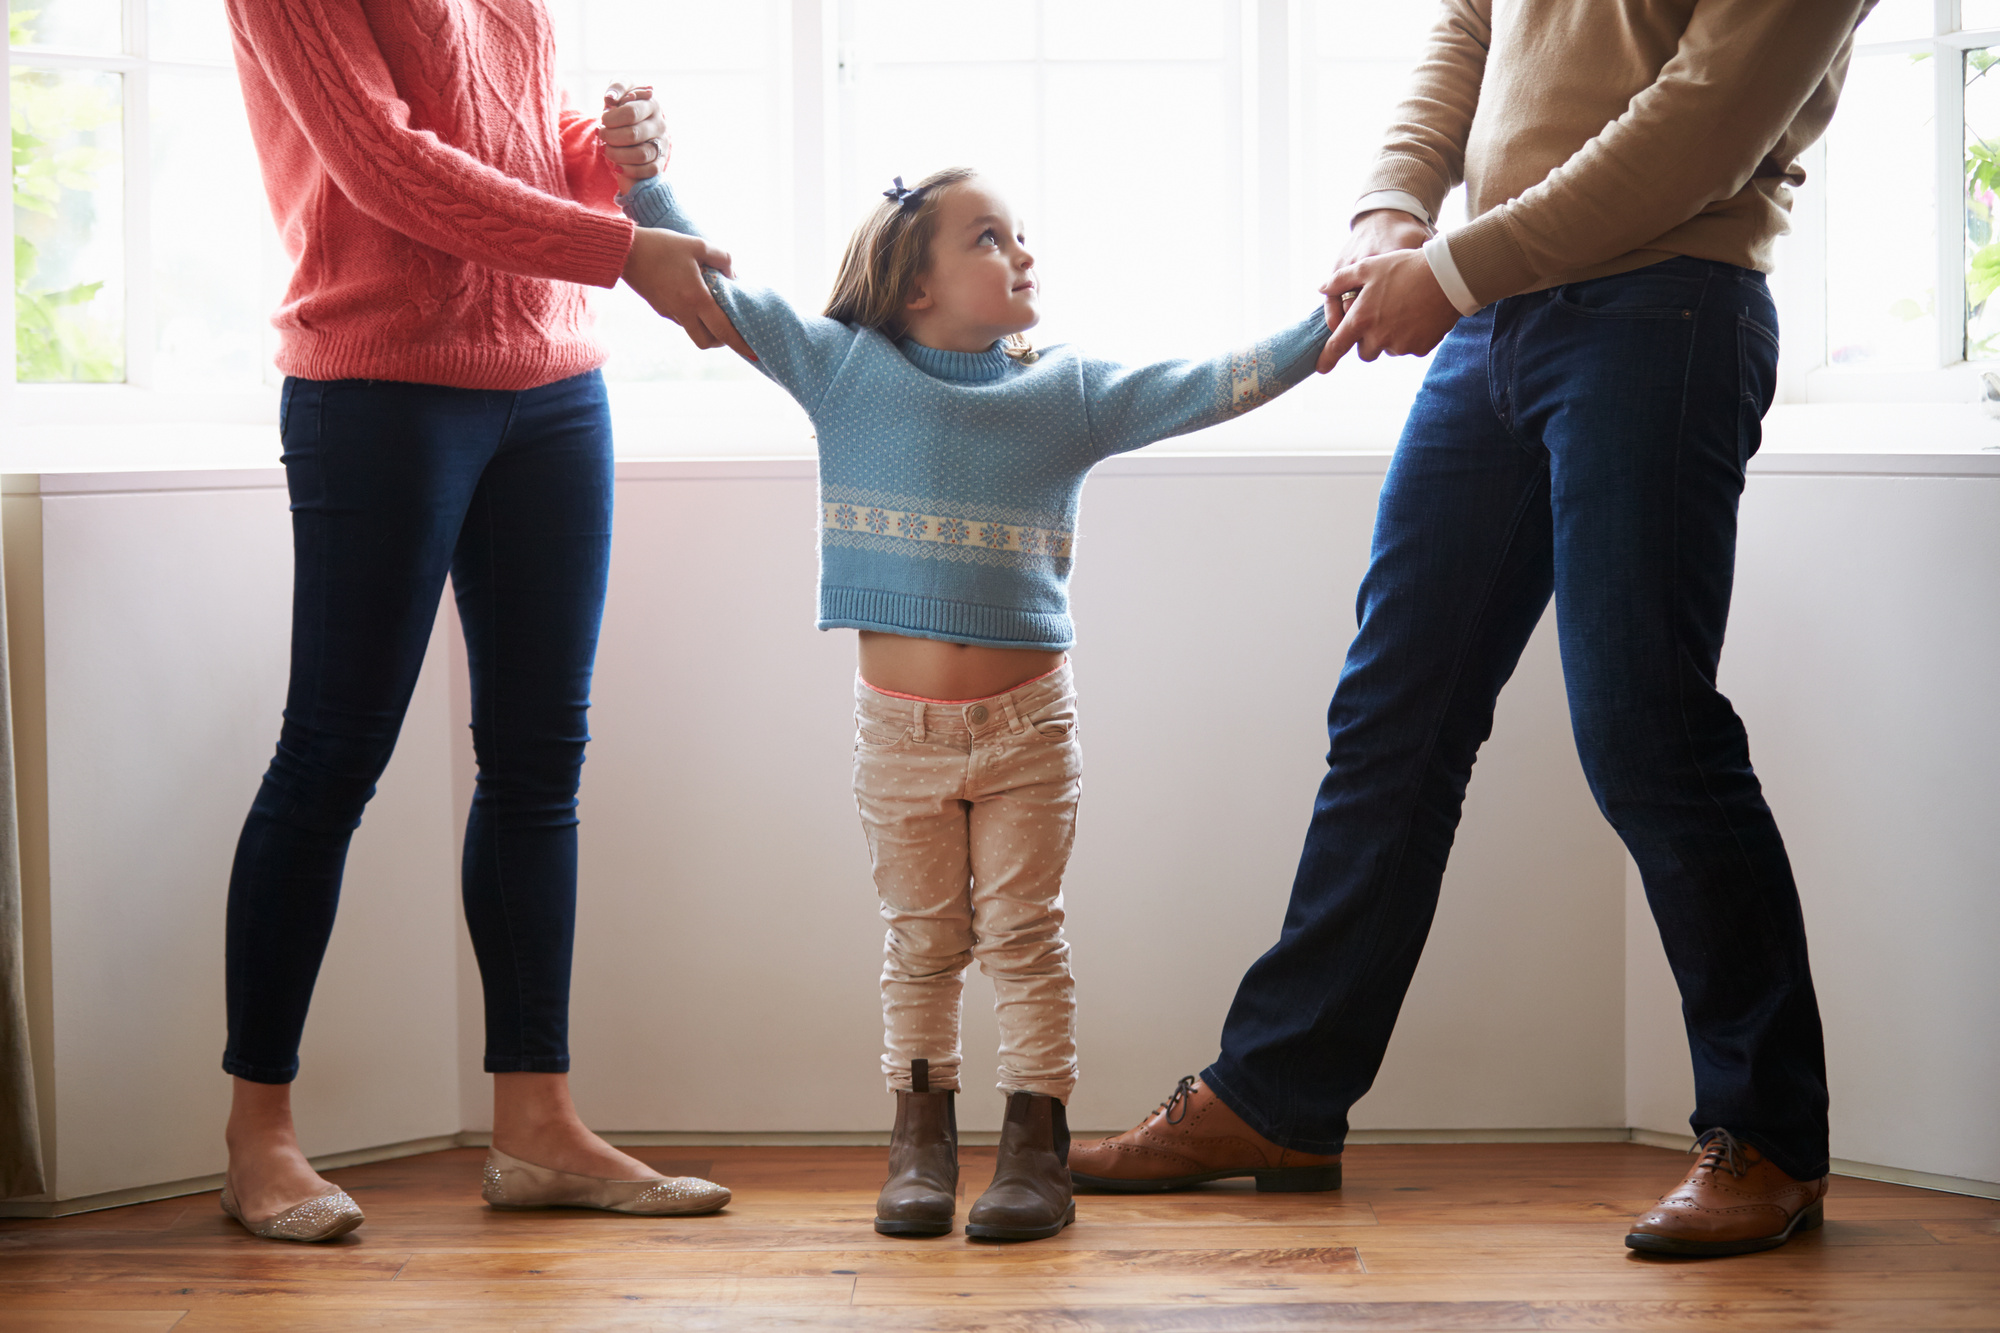 Negotiating child custody is difficult, no matter how agreeable the parties involved are. Learn about the top signs you need professional help here.